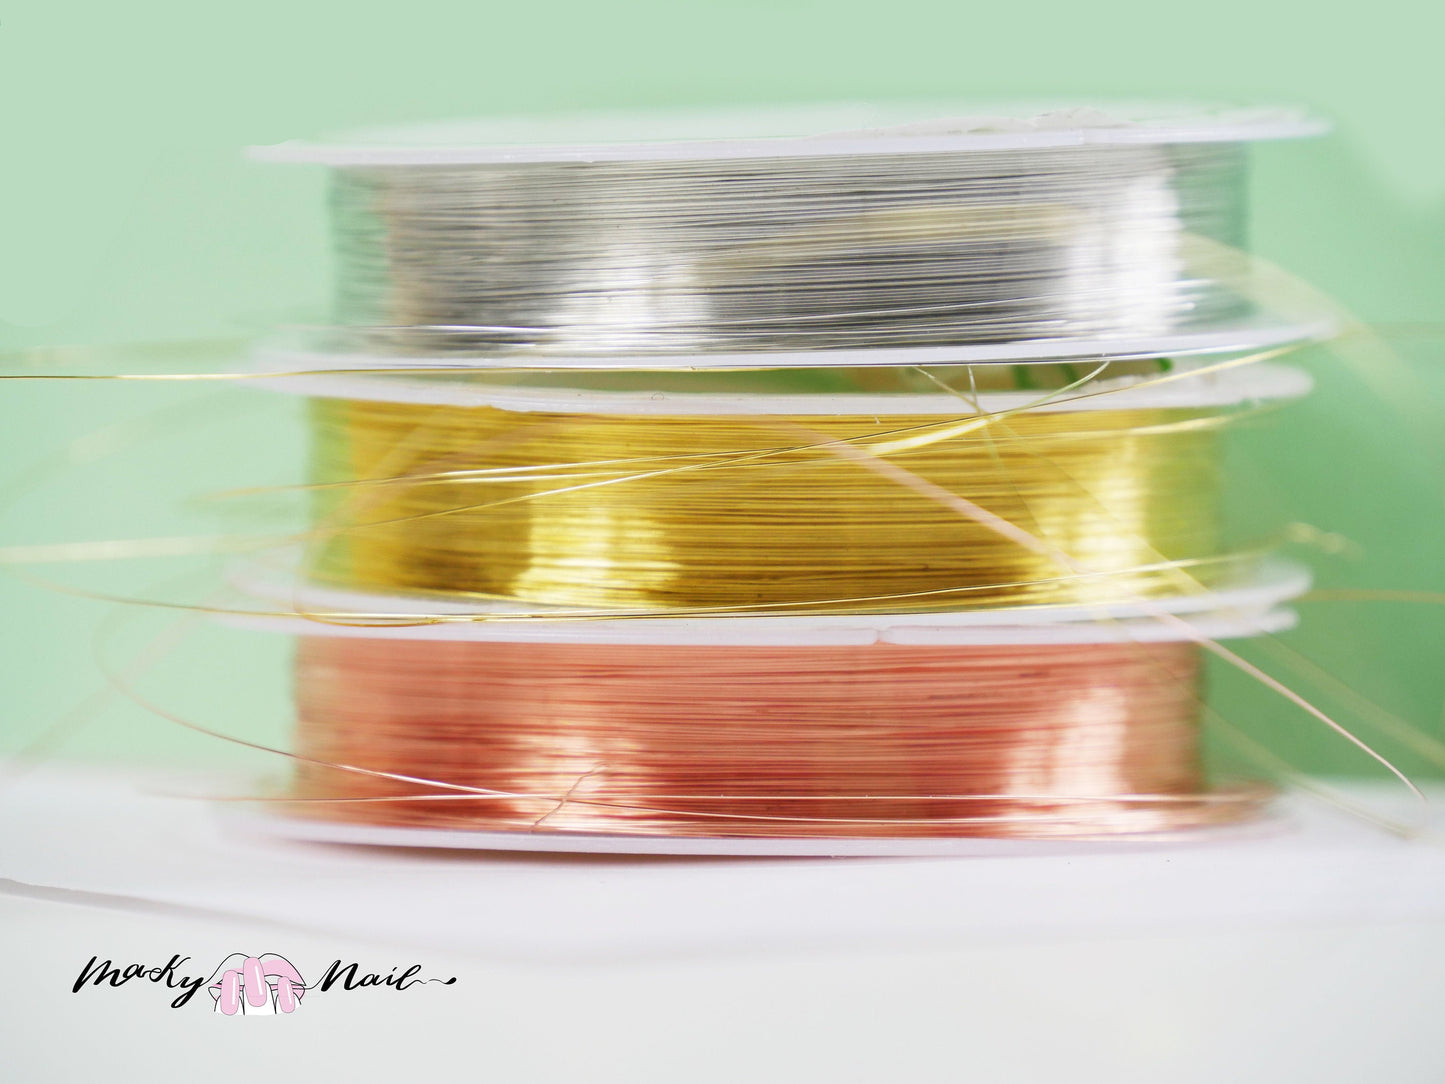 1 Roll silver,rose gold,gold metal wire for nail art nail design/ Nail deco wire 0.2mm